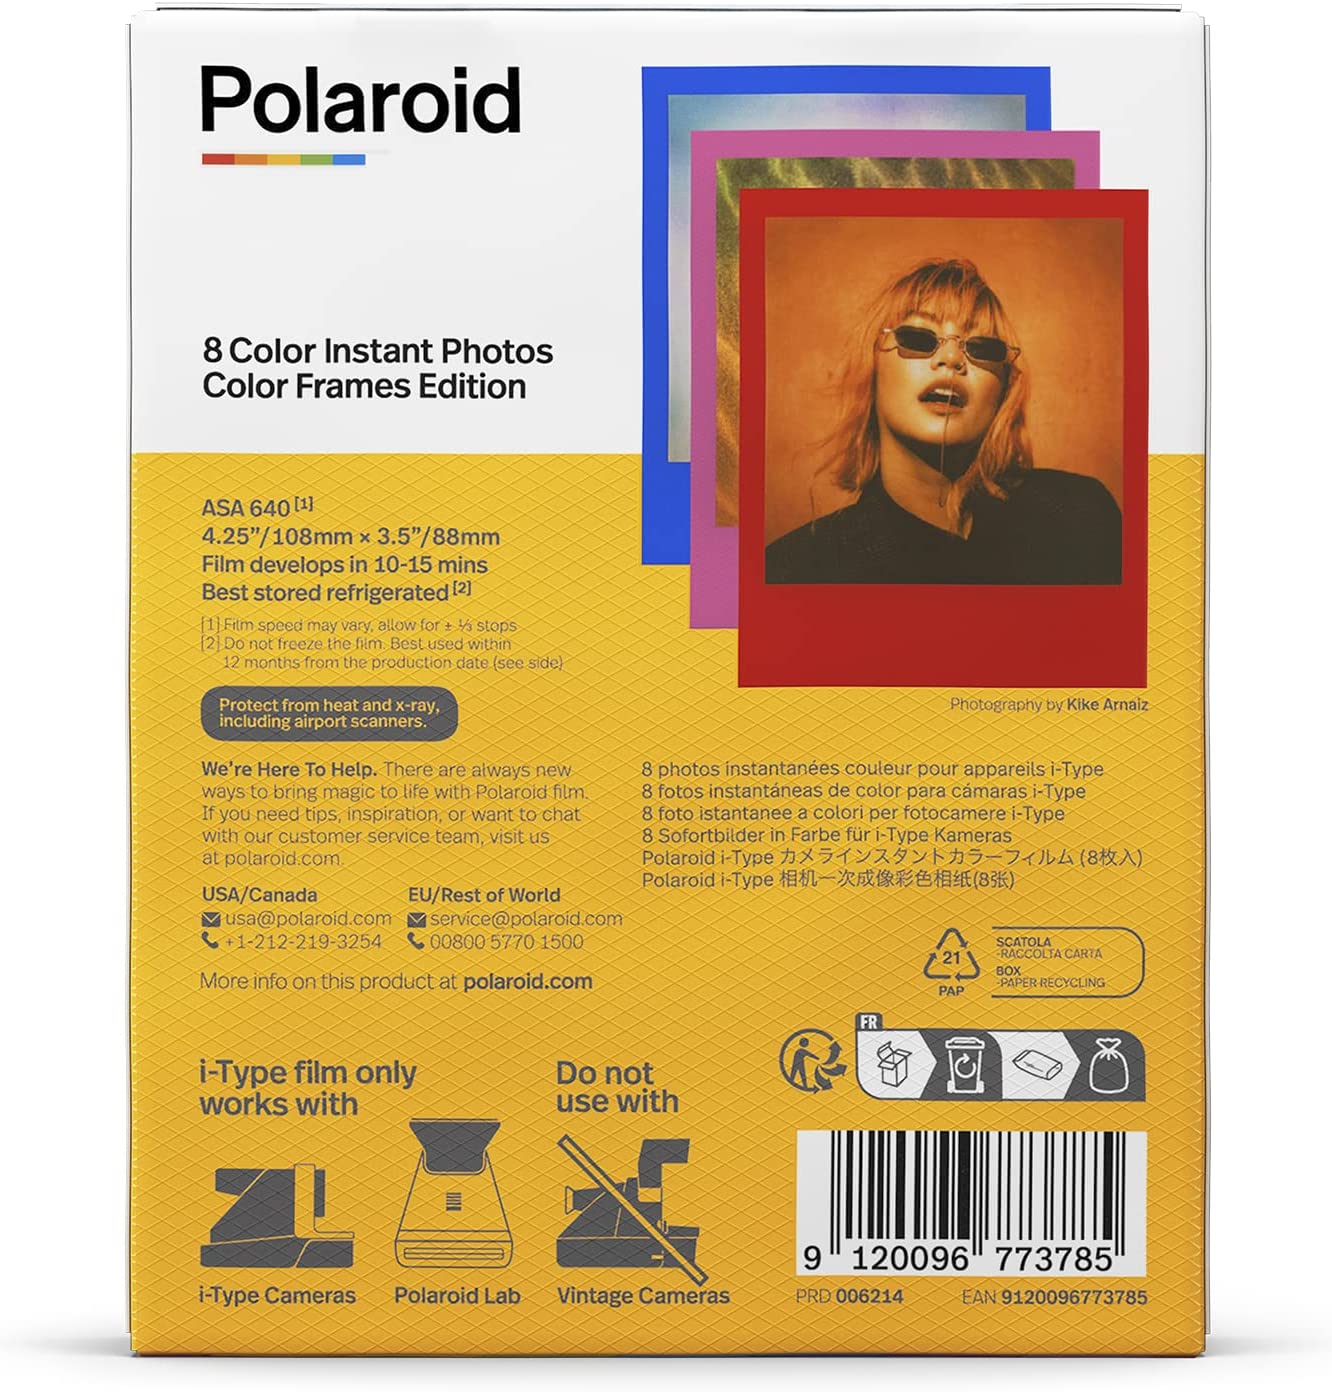 Polaroid Color Film for I-Type - Color Frames Edition (6214)